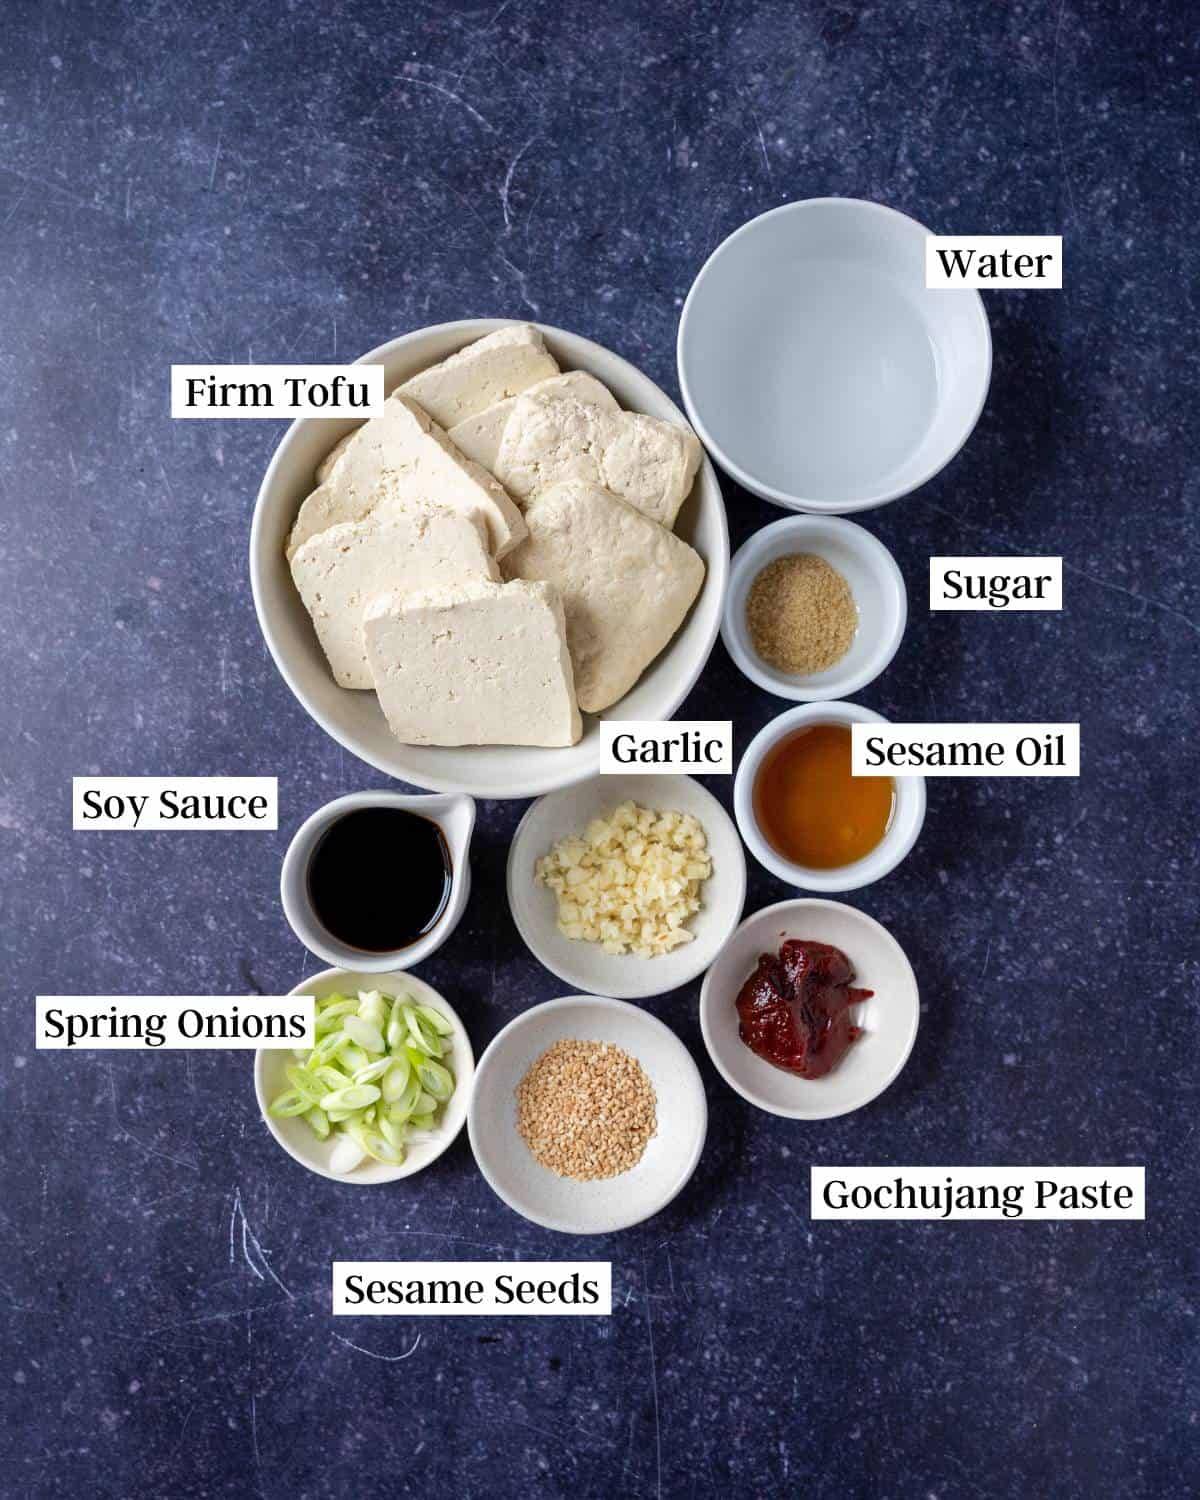 Ingredients for braised tofu on a dark surface.